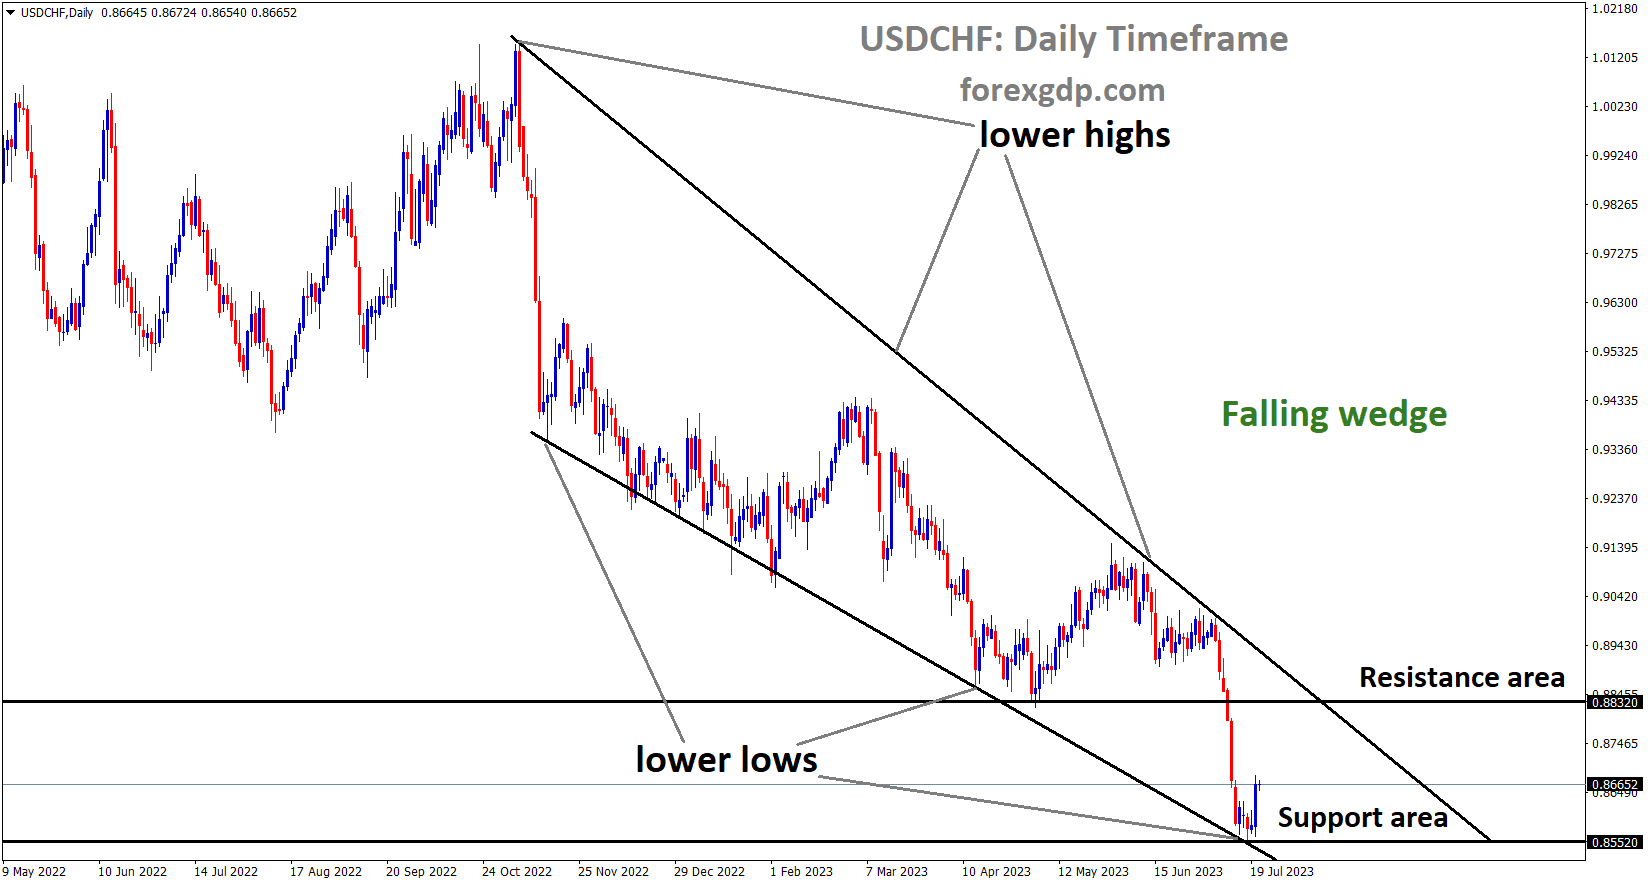 USDCHF is moving in the Falling wedge pattern and the market has rebounded from the lower low area of the channel